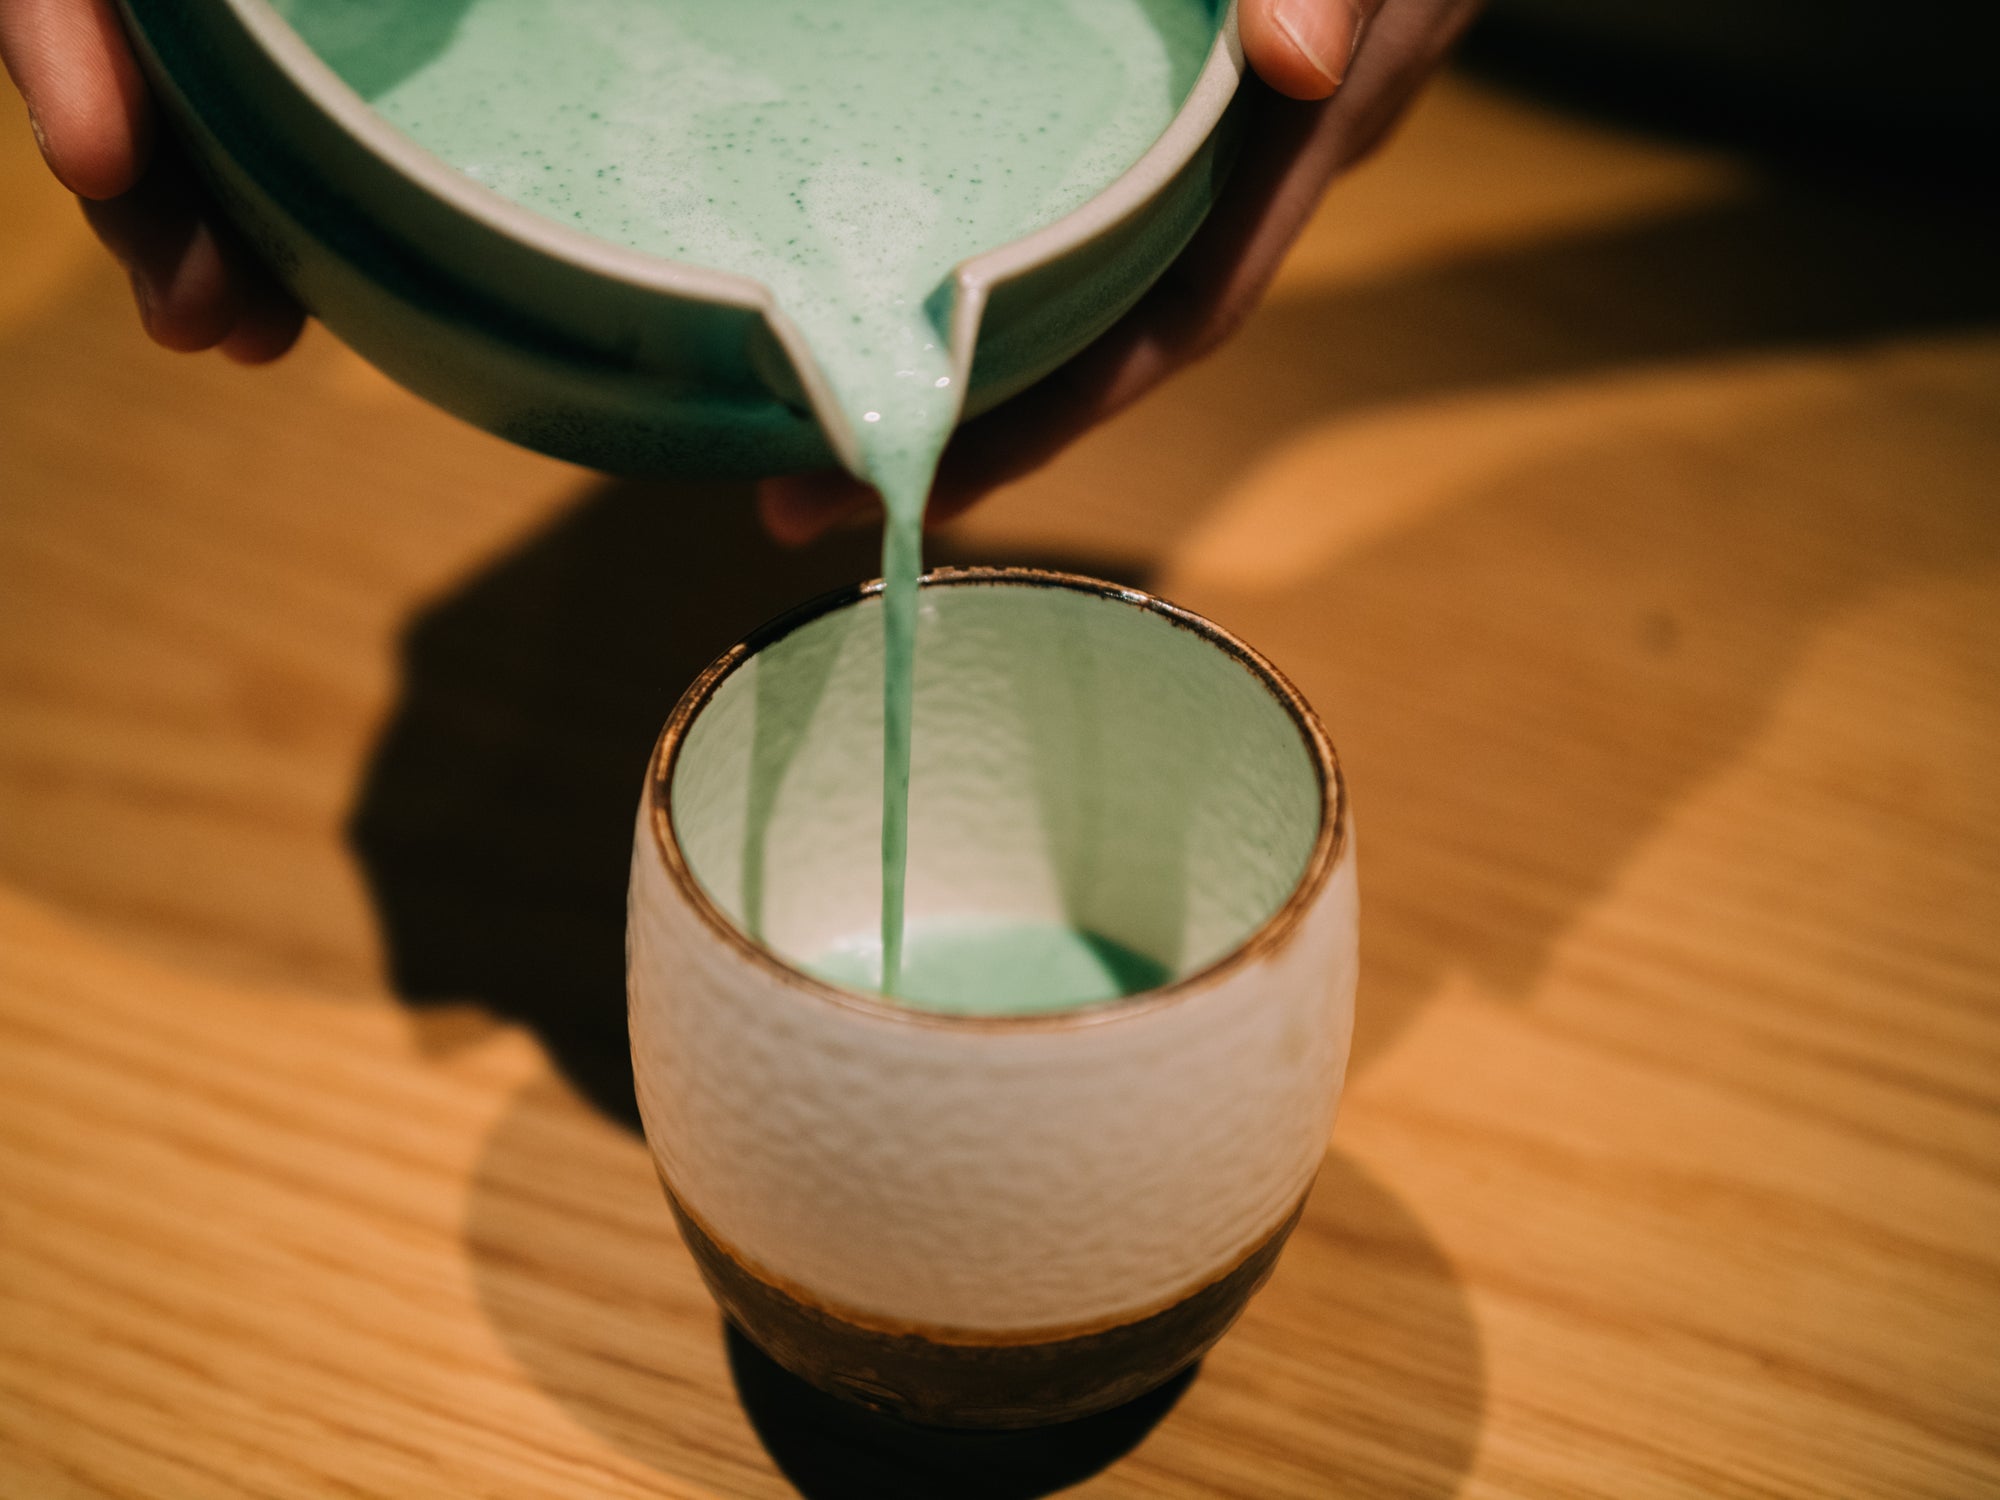 Make your own Matcha green tea latte at home